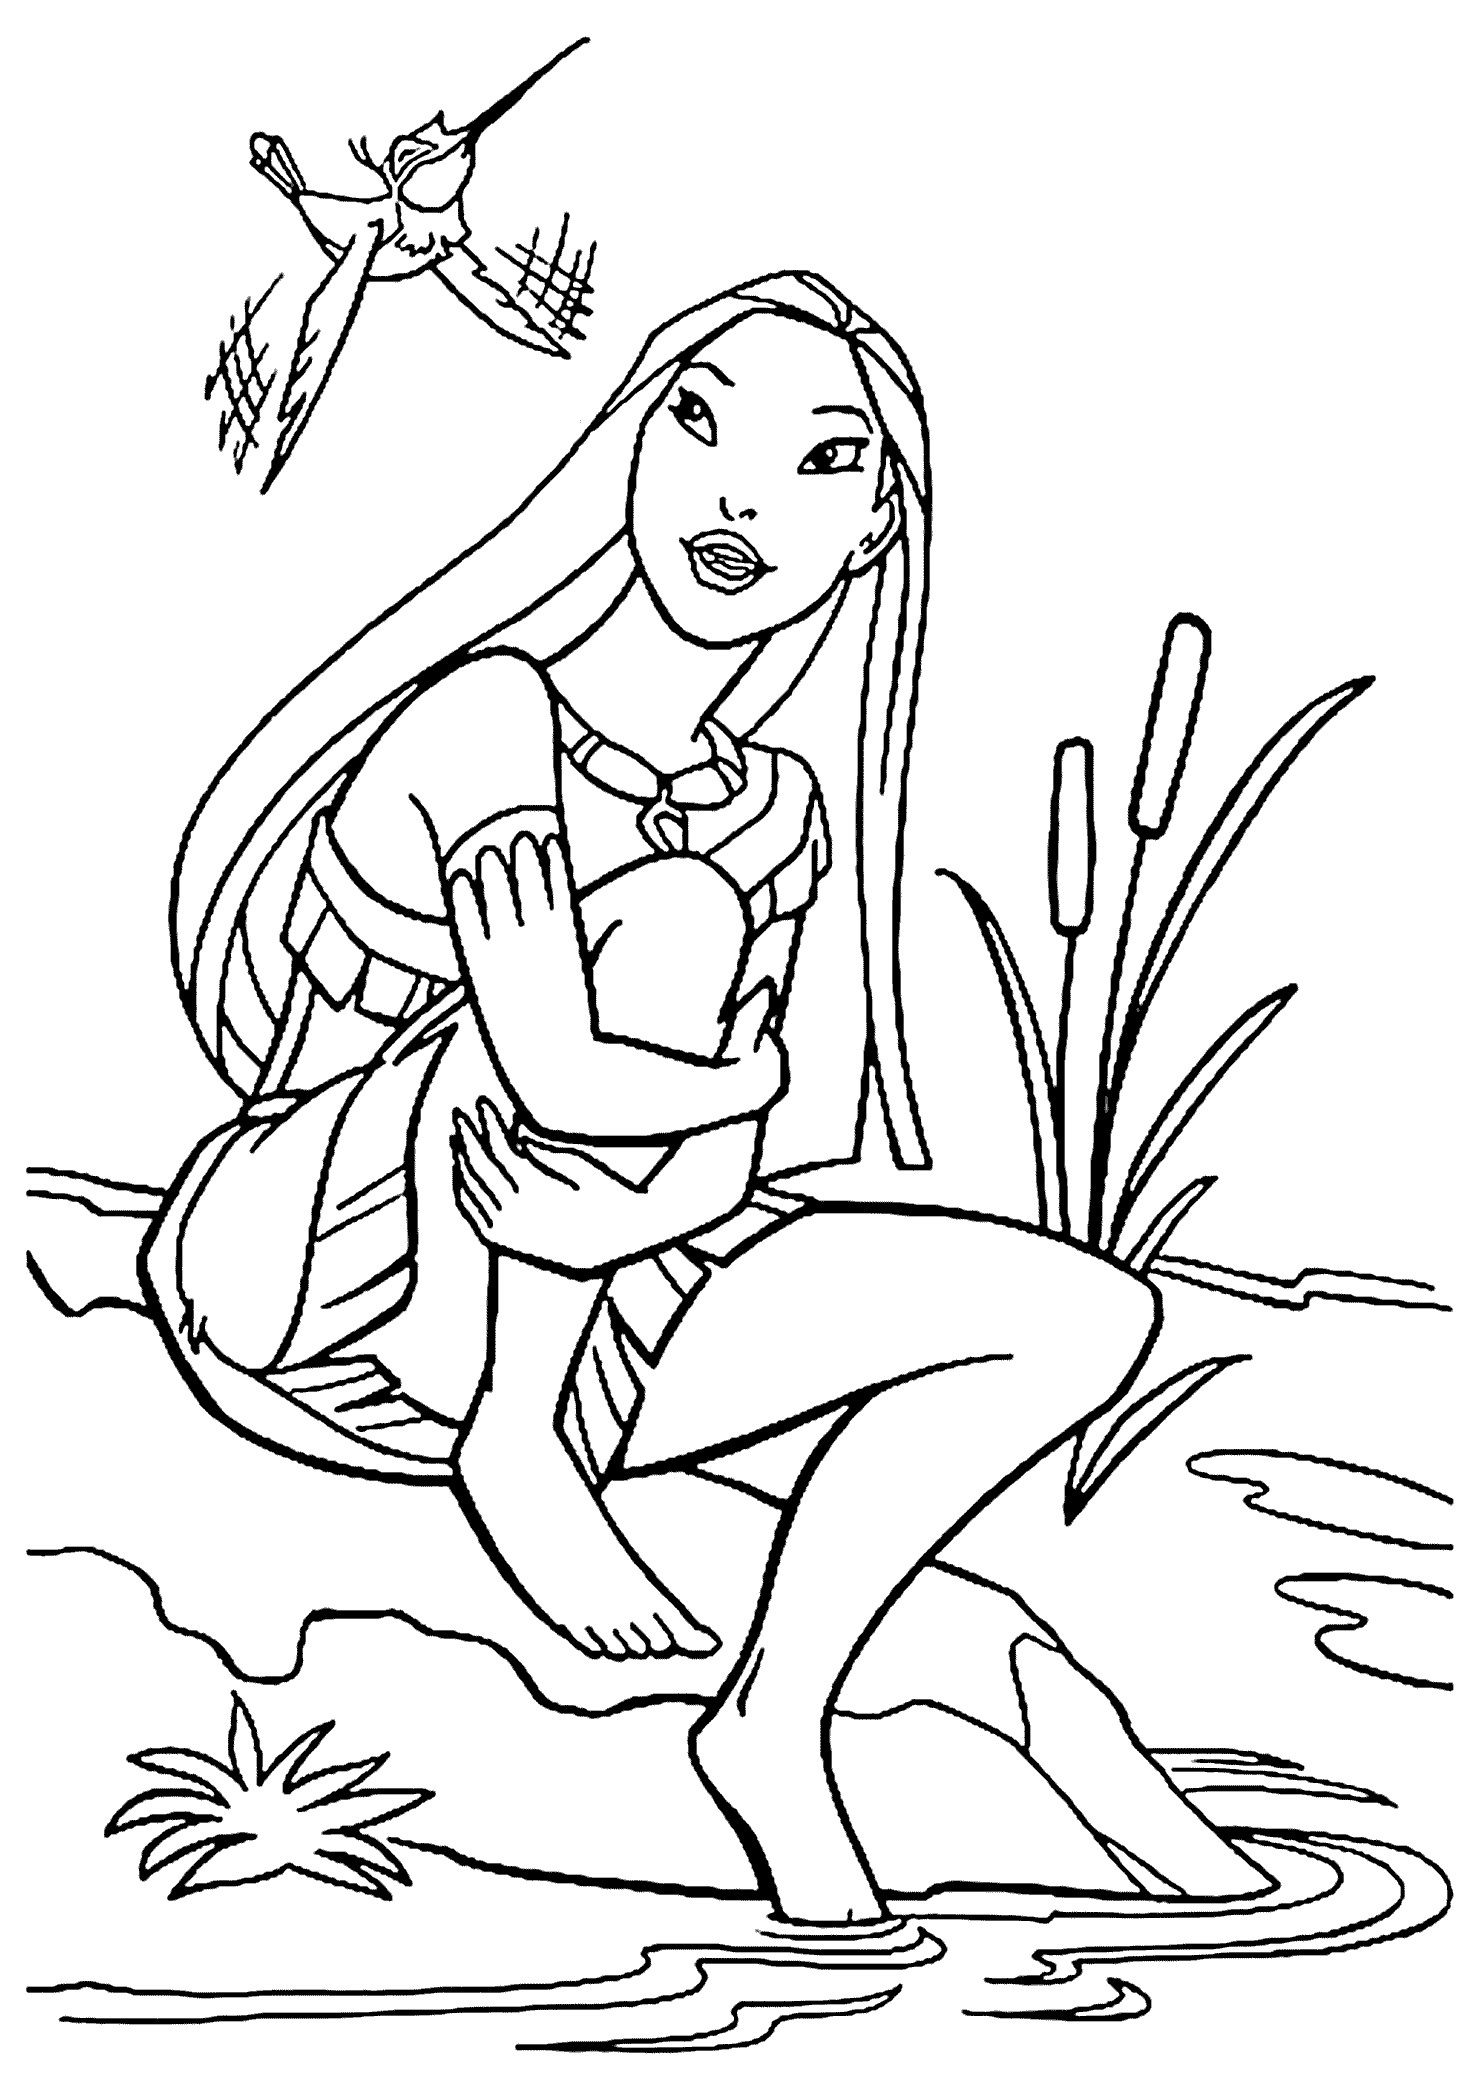 Coloring Books For Kids
 Pocahontas cartoon coloring pages for kids printable free